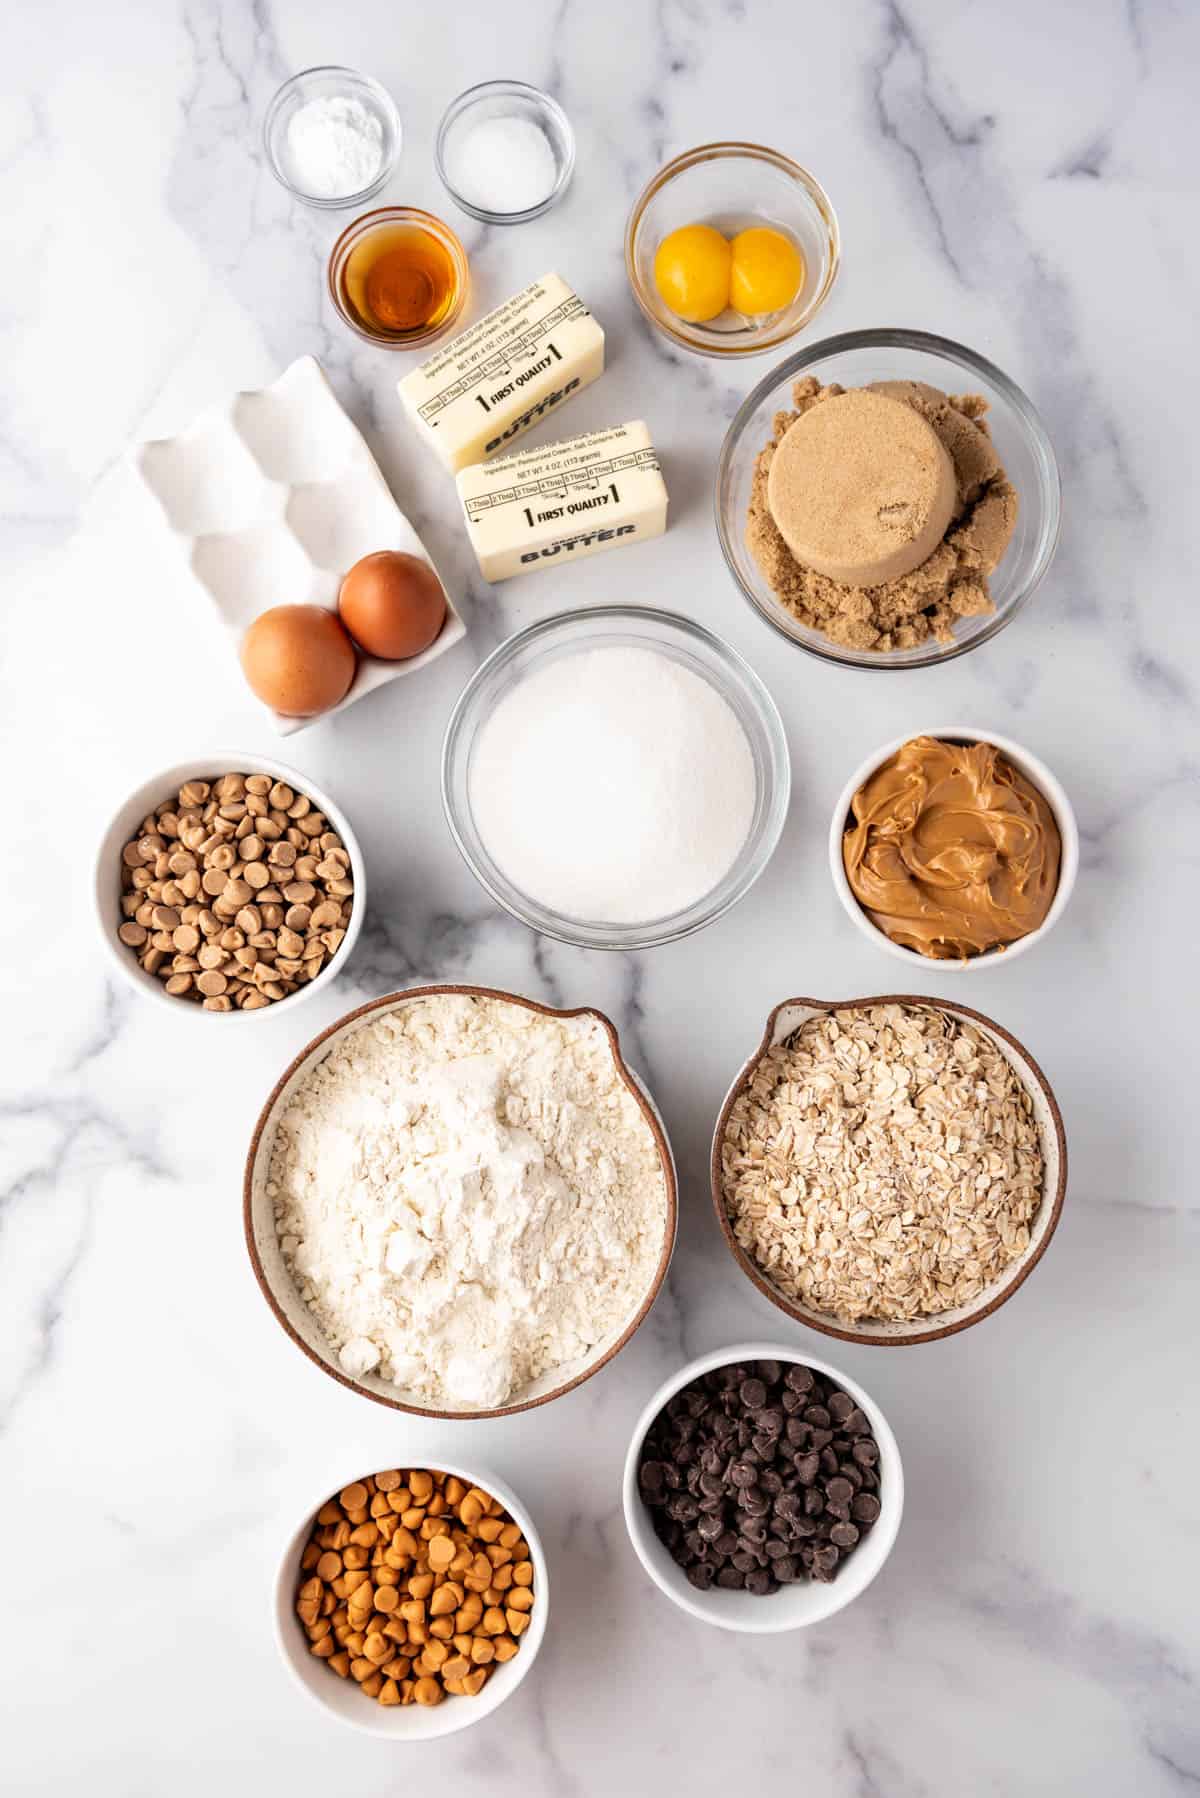 An image of ingredients for peanut butter oatmeal butterscotch chocolate chip cookies.